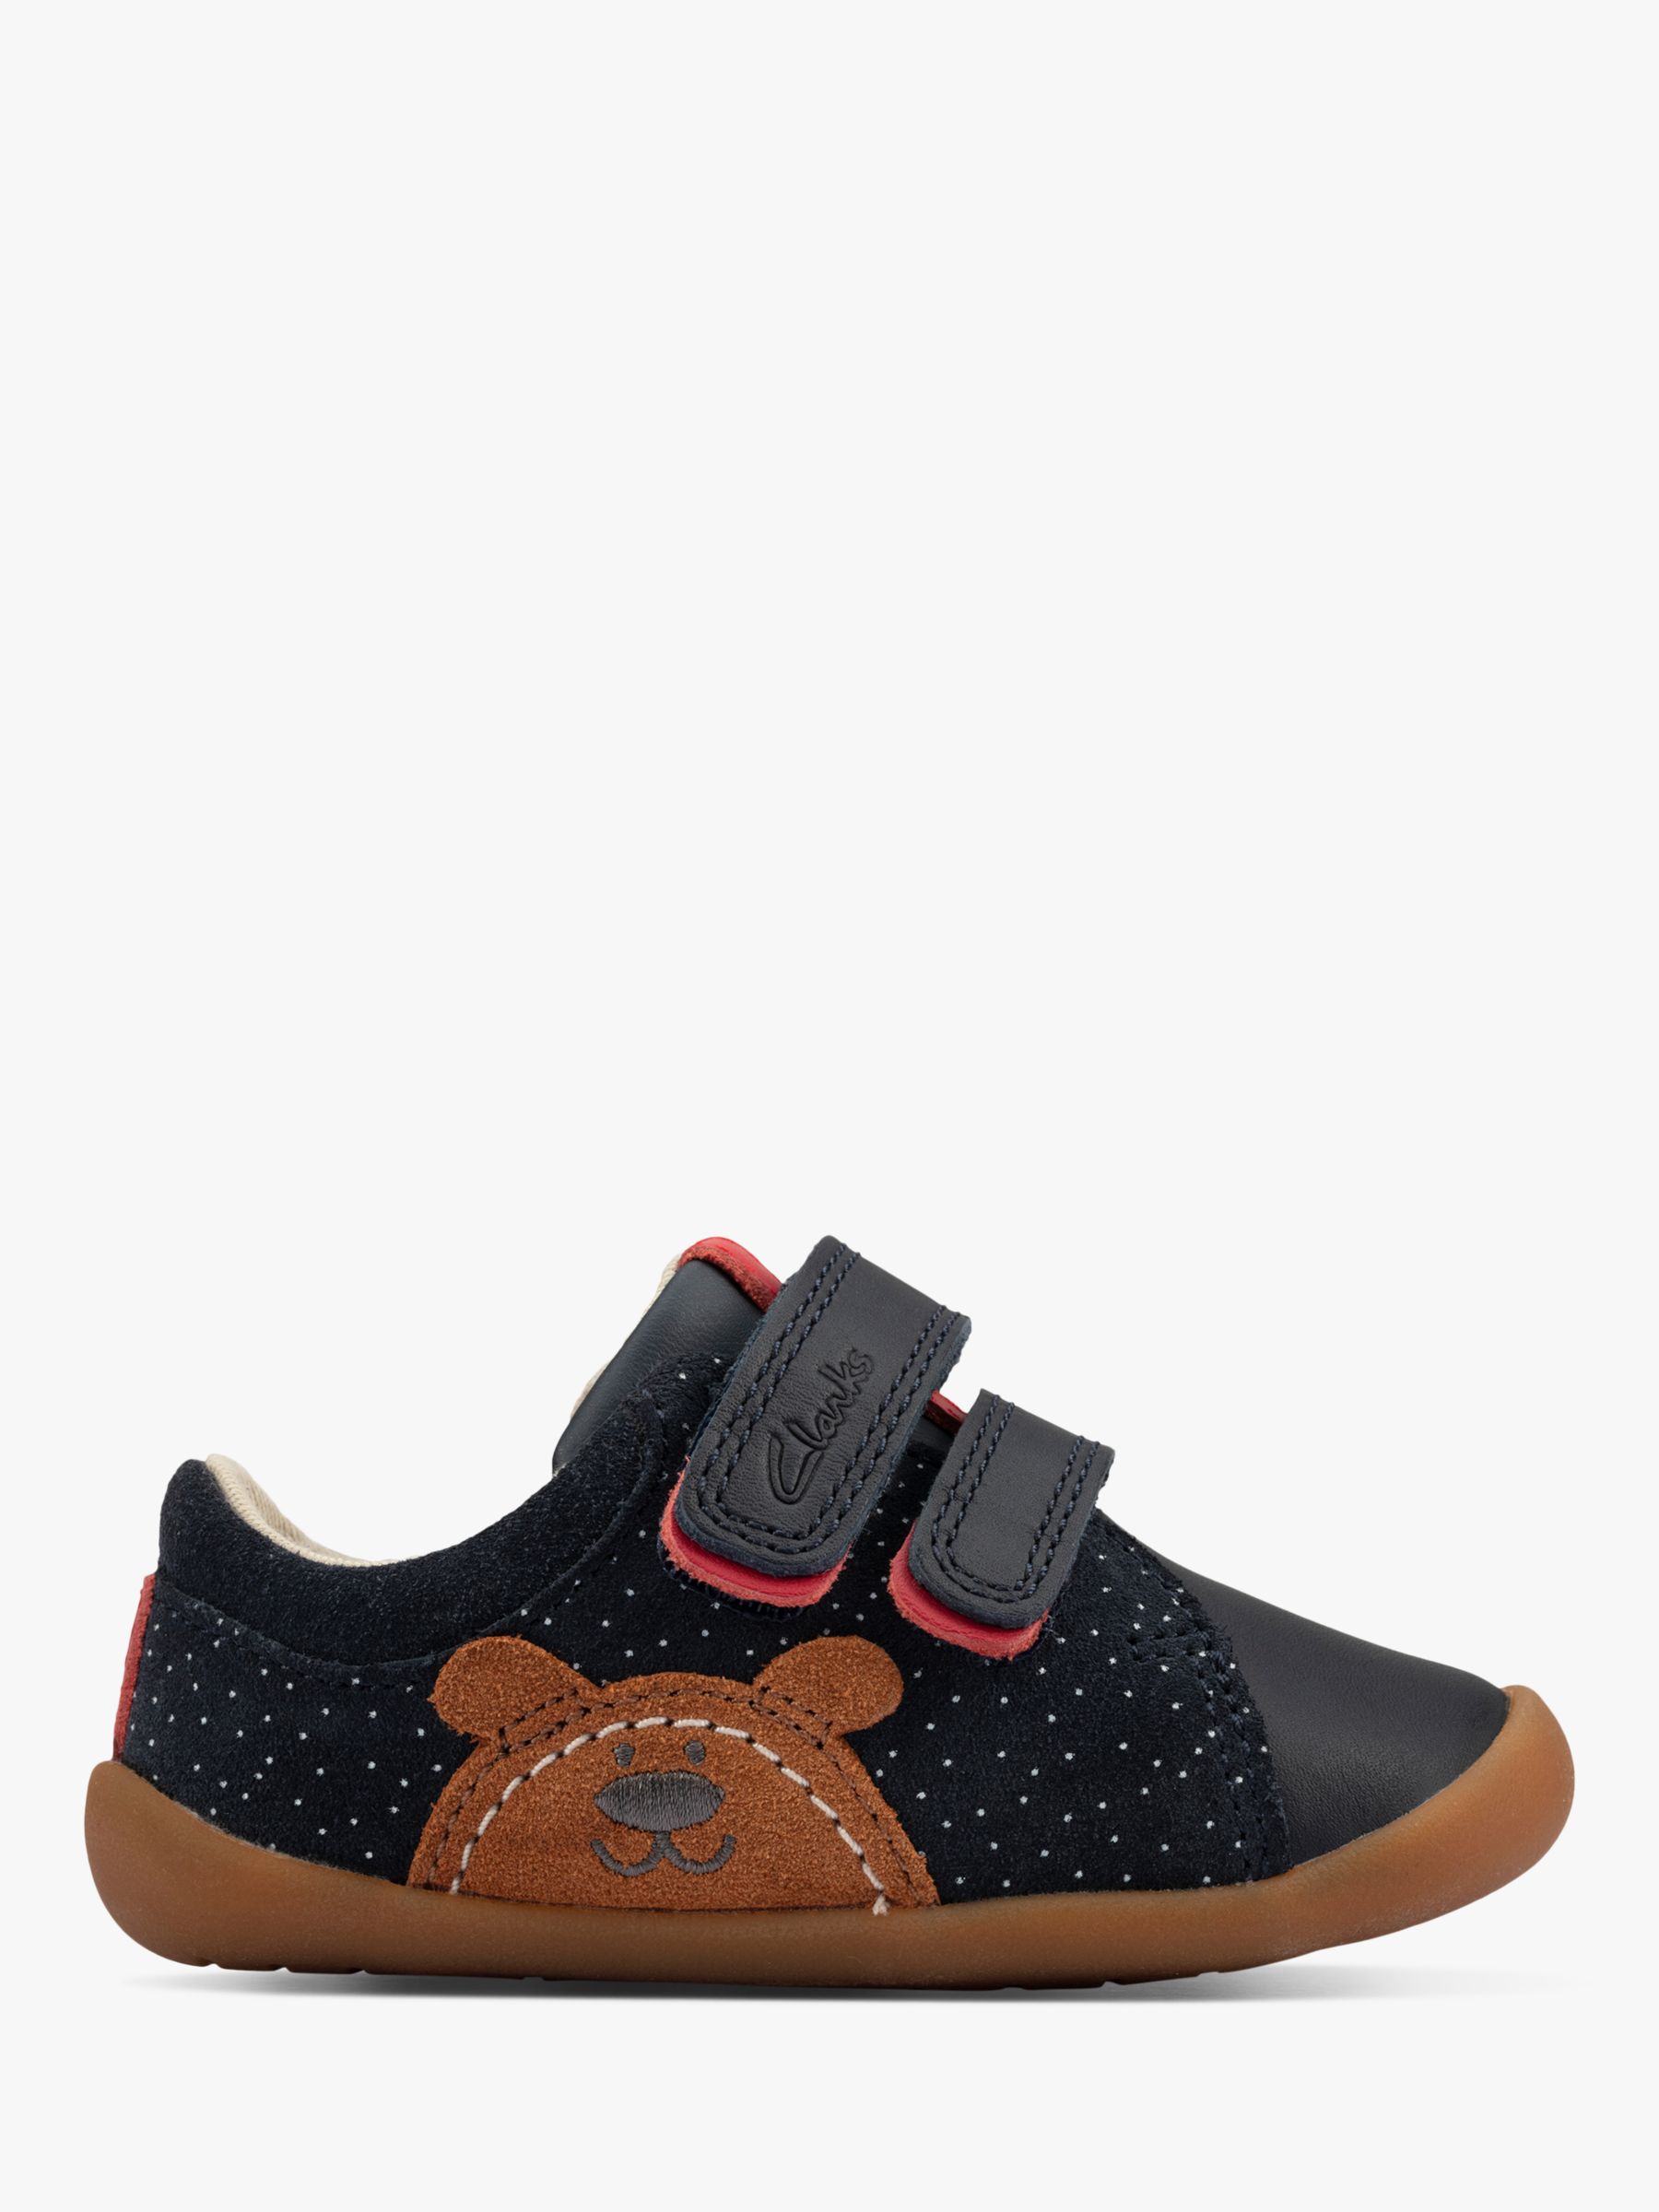 Clarks Star Kind Toddler Suede Shoes in 